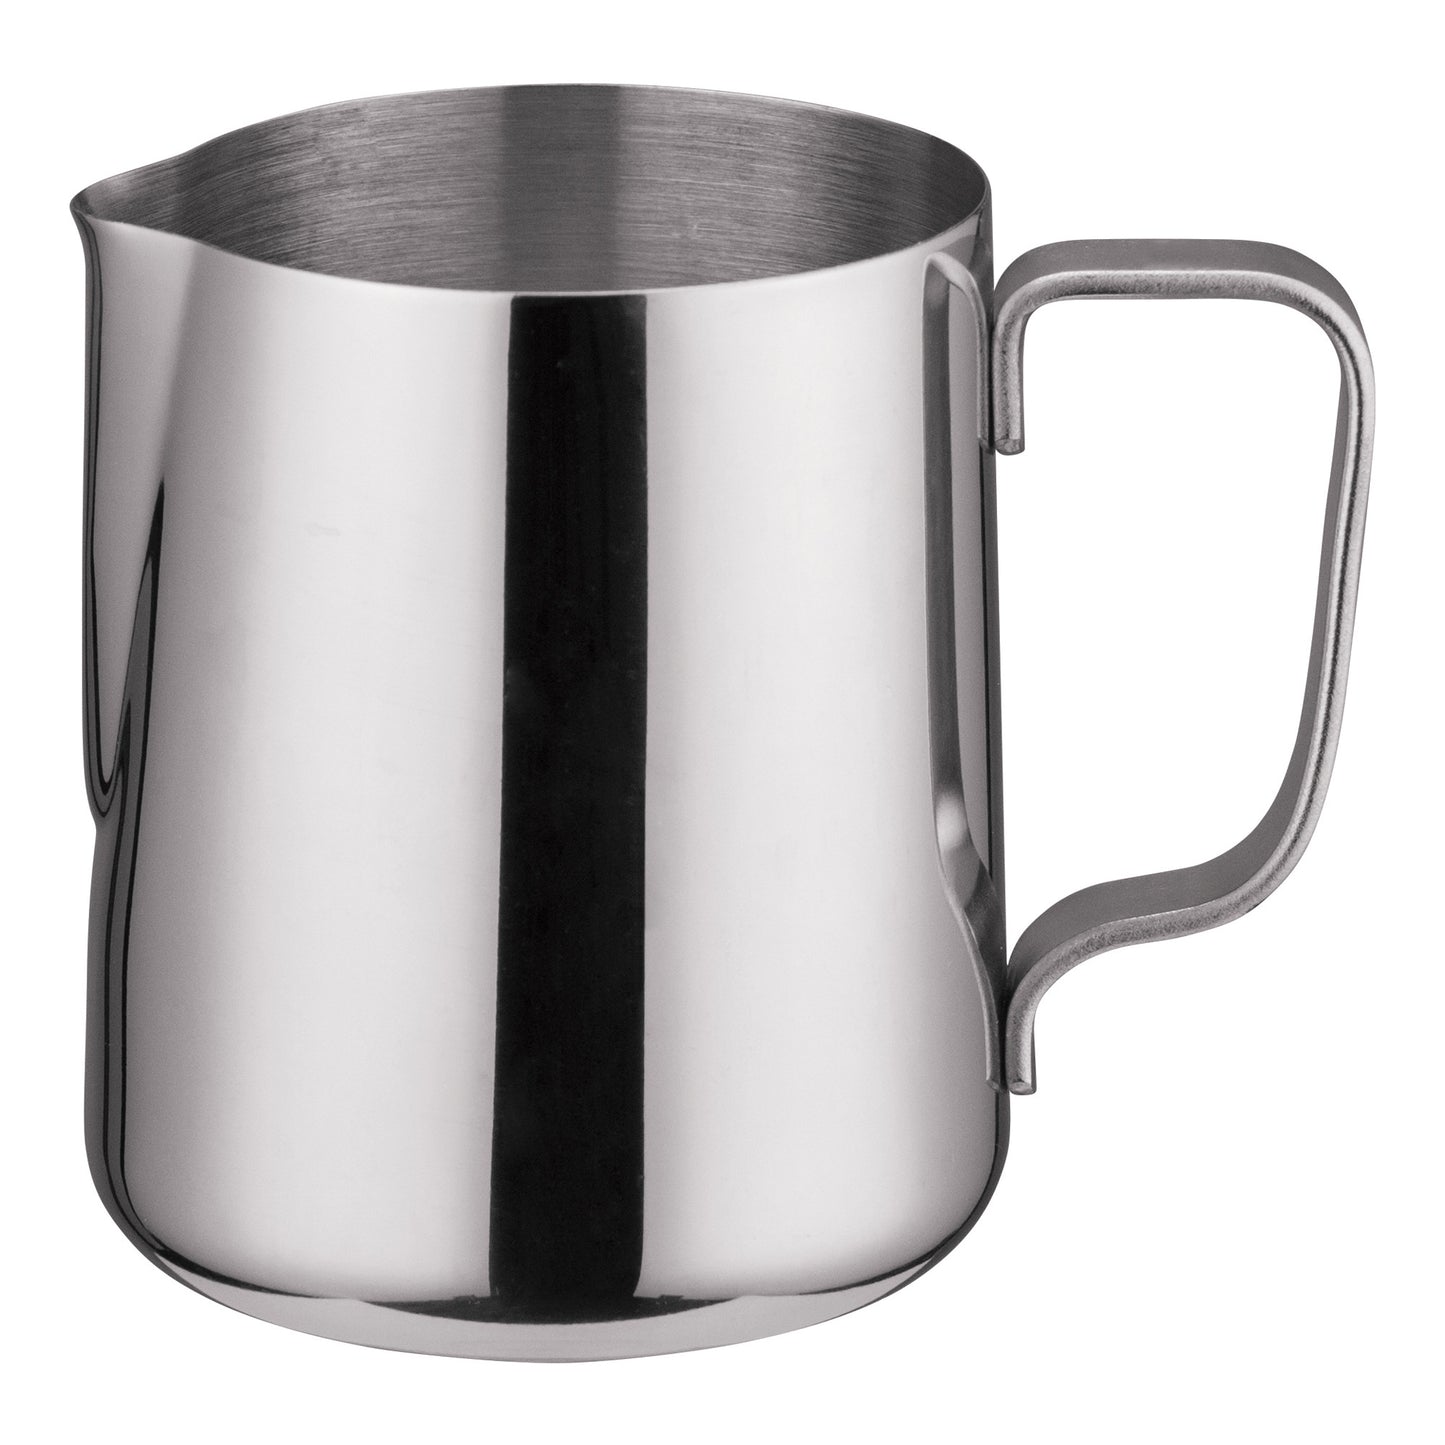 WP-14 - Frothing Pitcher, Stainless Steel - 11 oz